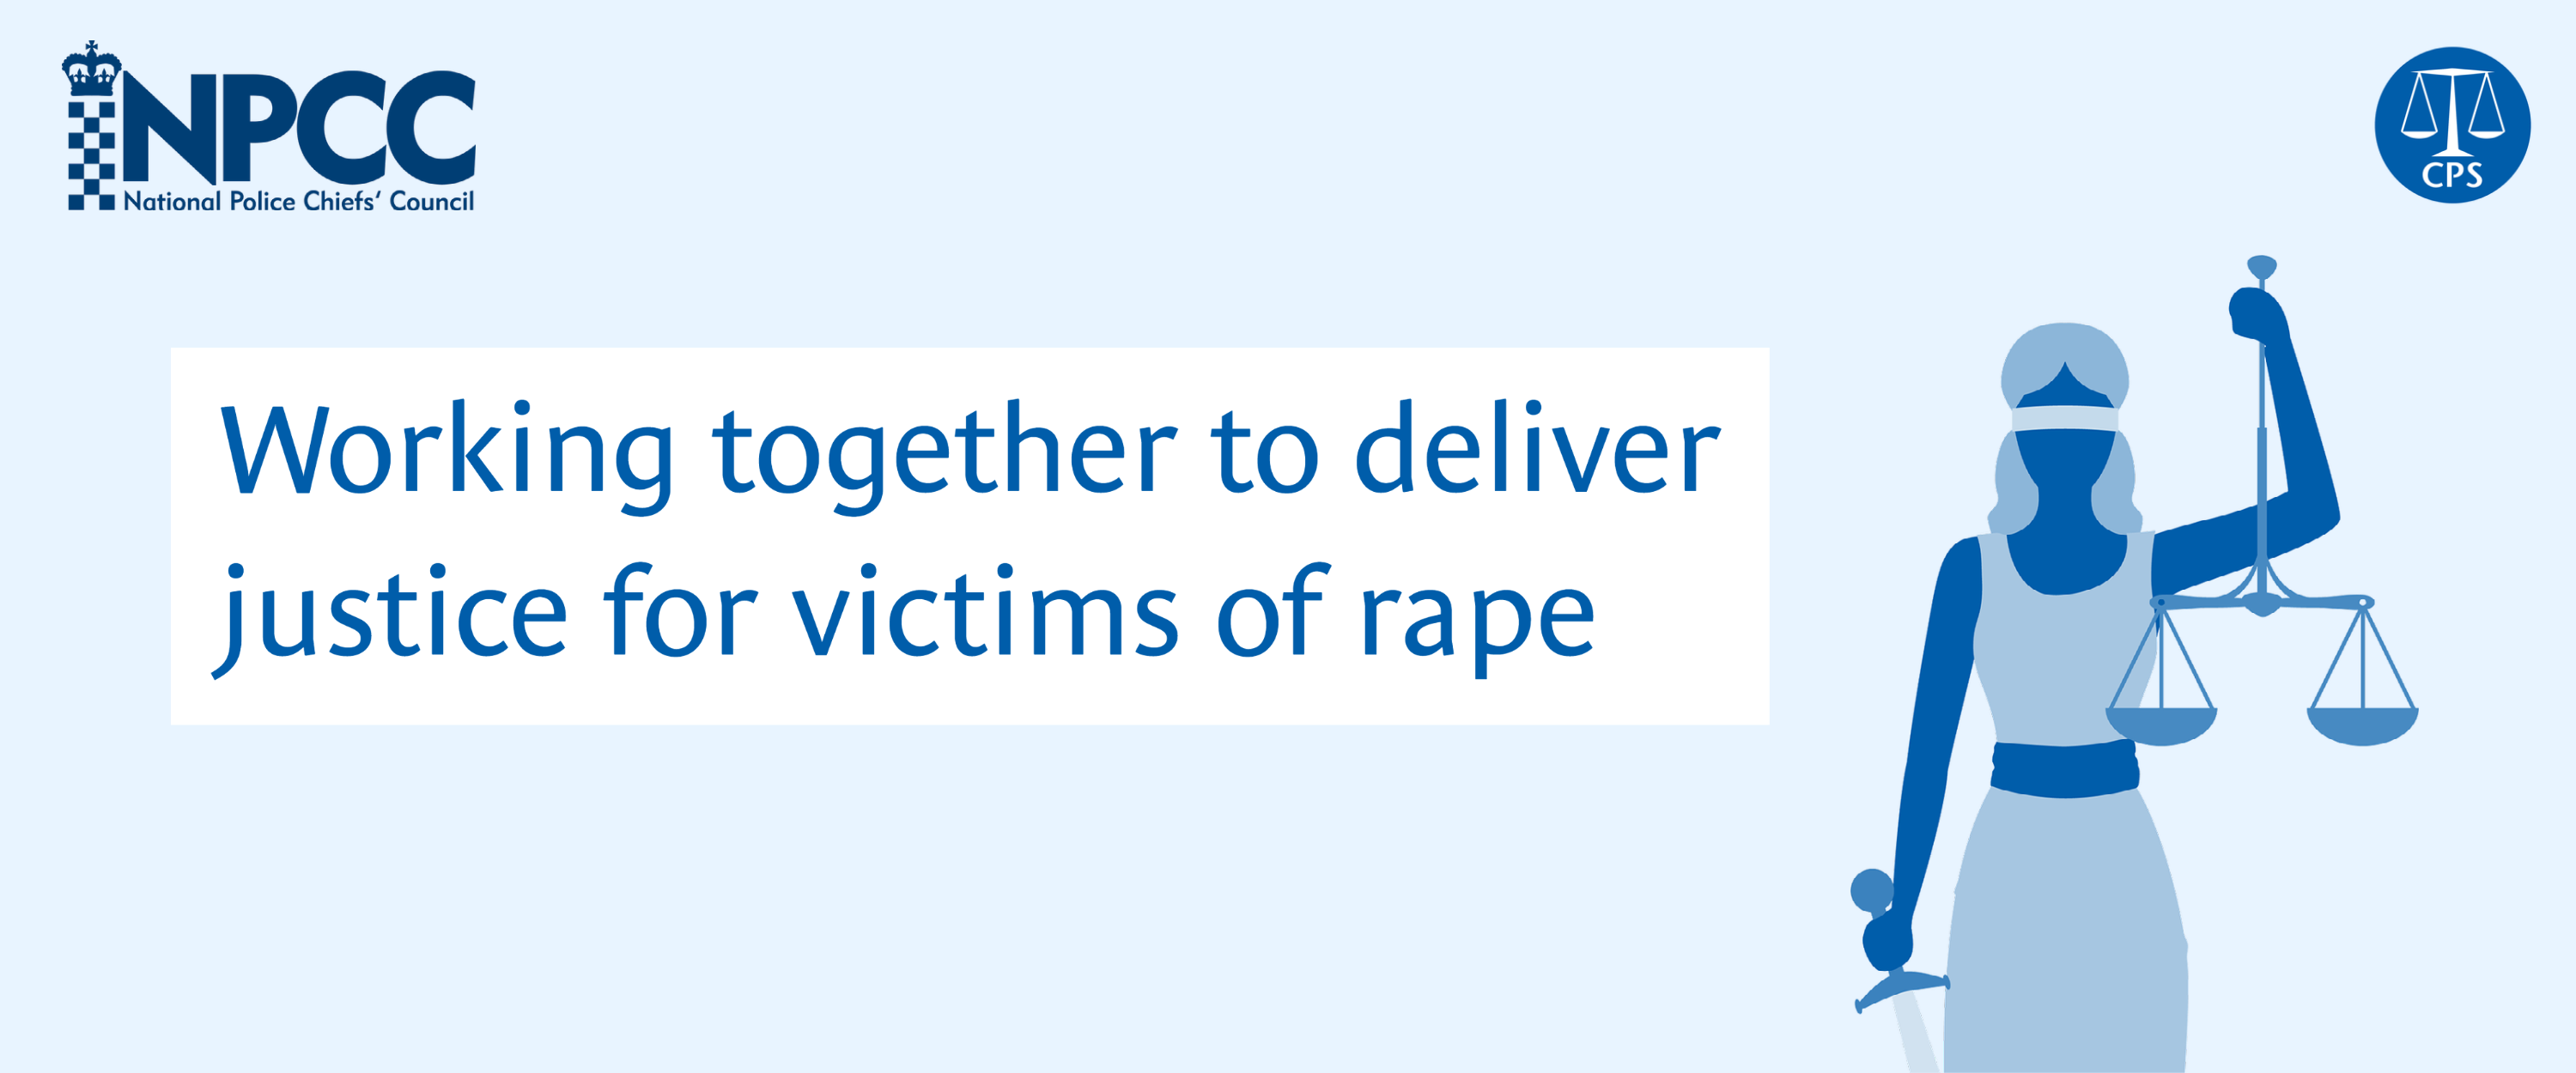 CPS and NPCC: Working together to deliver justice for victims of rape